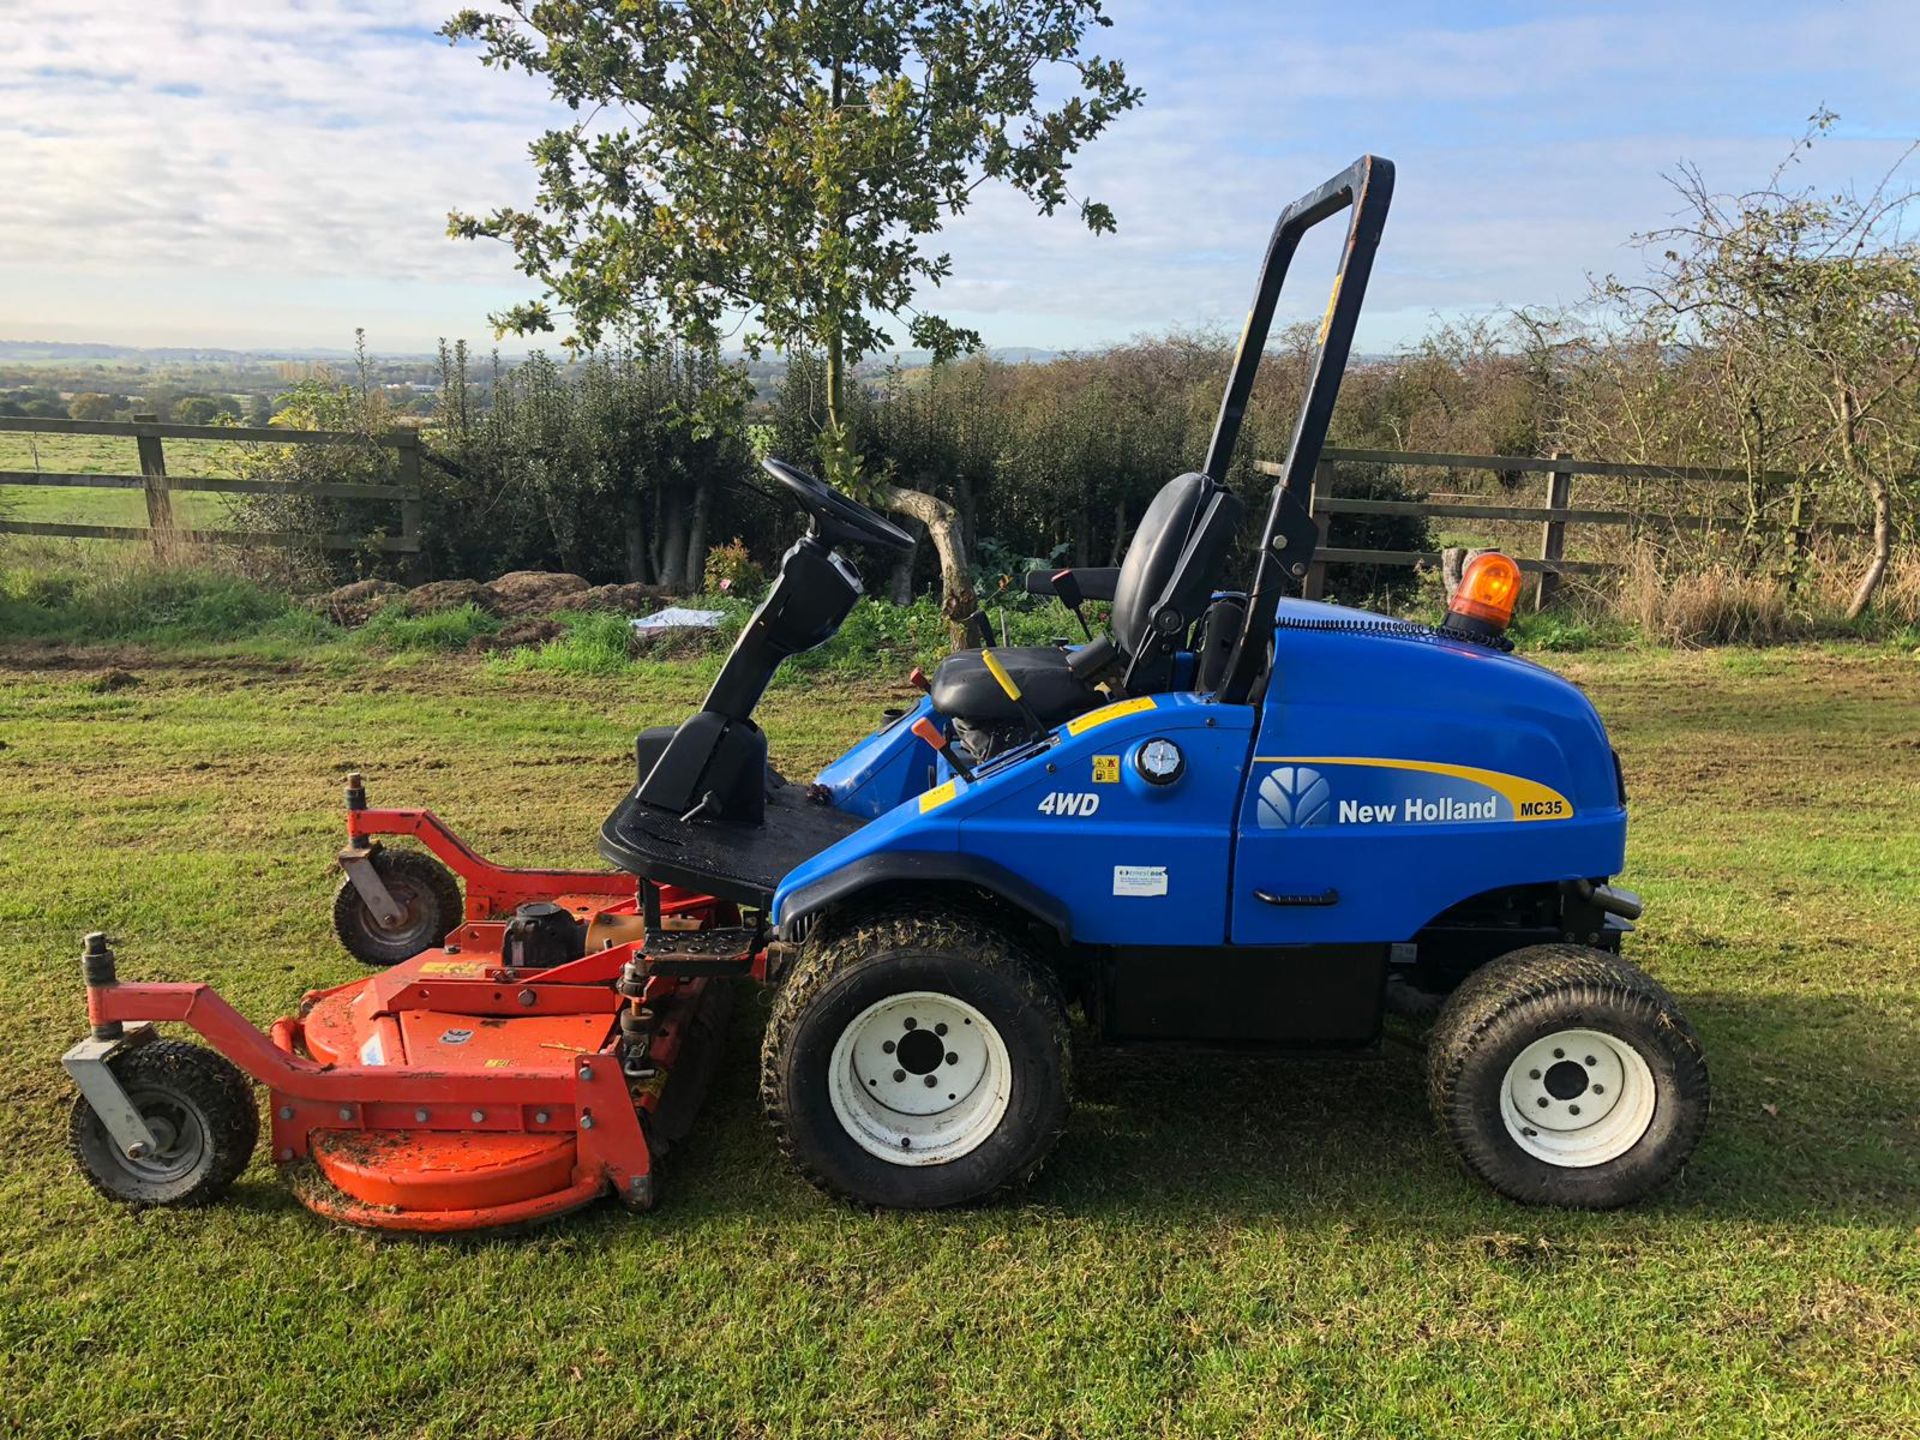 2010/60 REG NEW HOLLAND MC35 4WD RIDE ON LAWN MOWER LOW HOURS *PLUS VAT* - Image 7 of 21